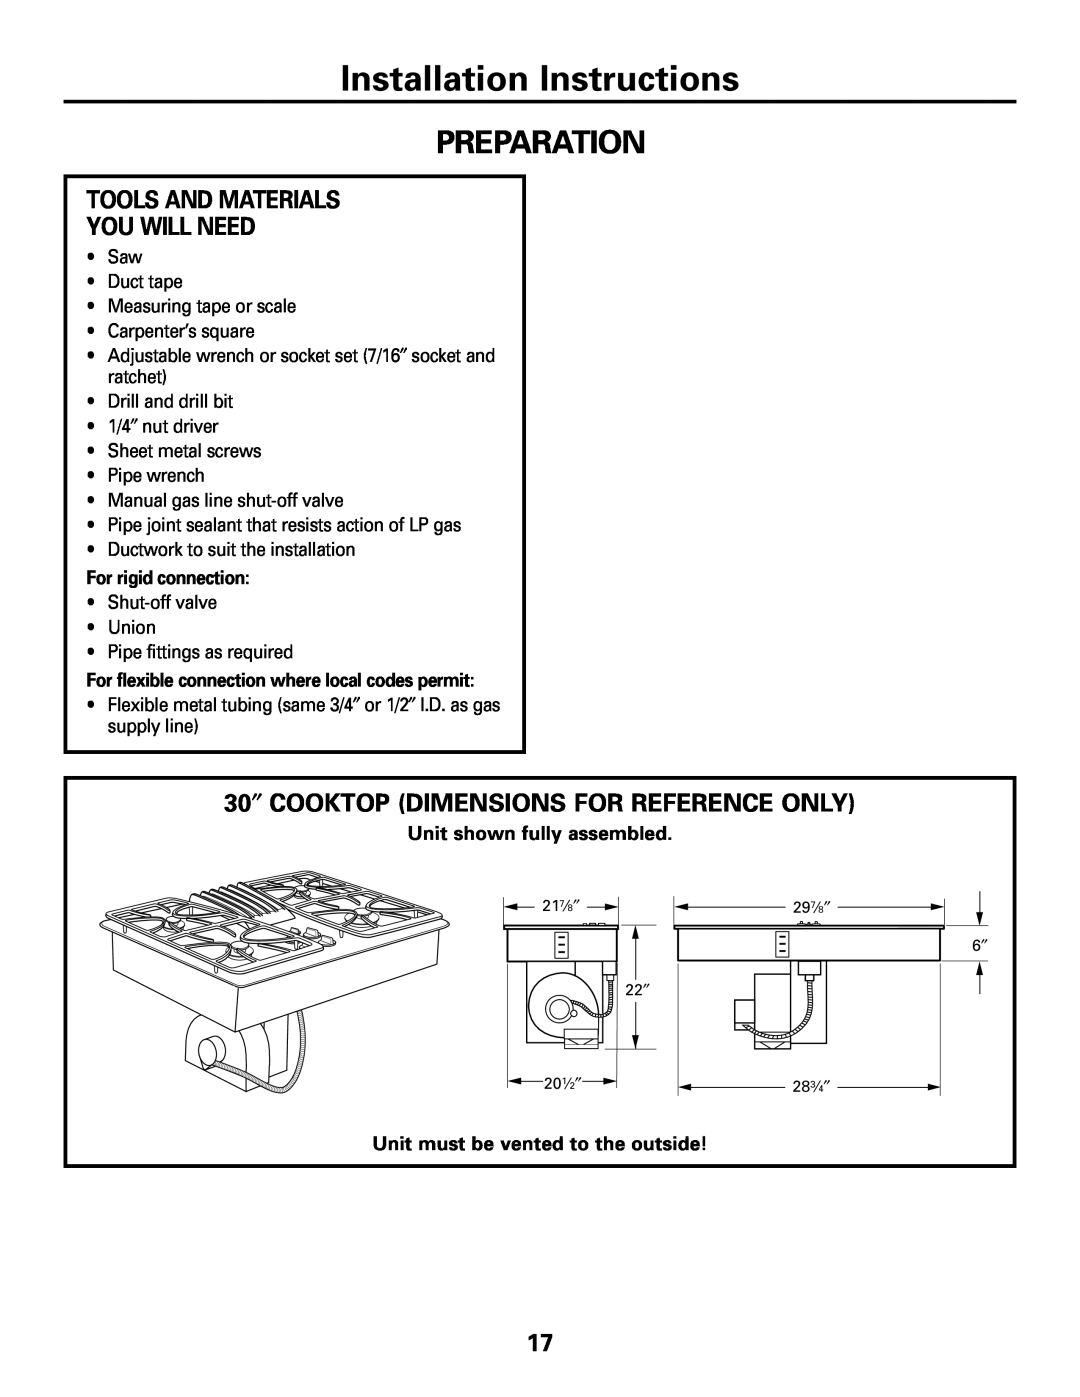 GE JGP989 Preparation, Installation Instructions, For rigid connection, For flexible connection where local codes permit 